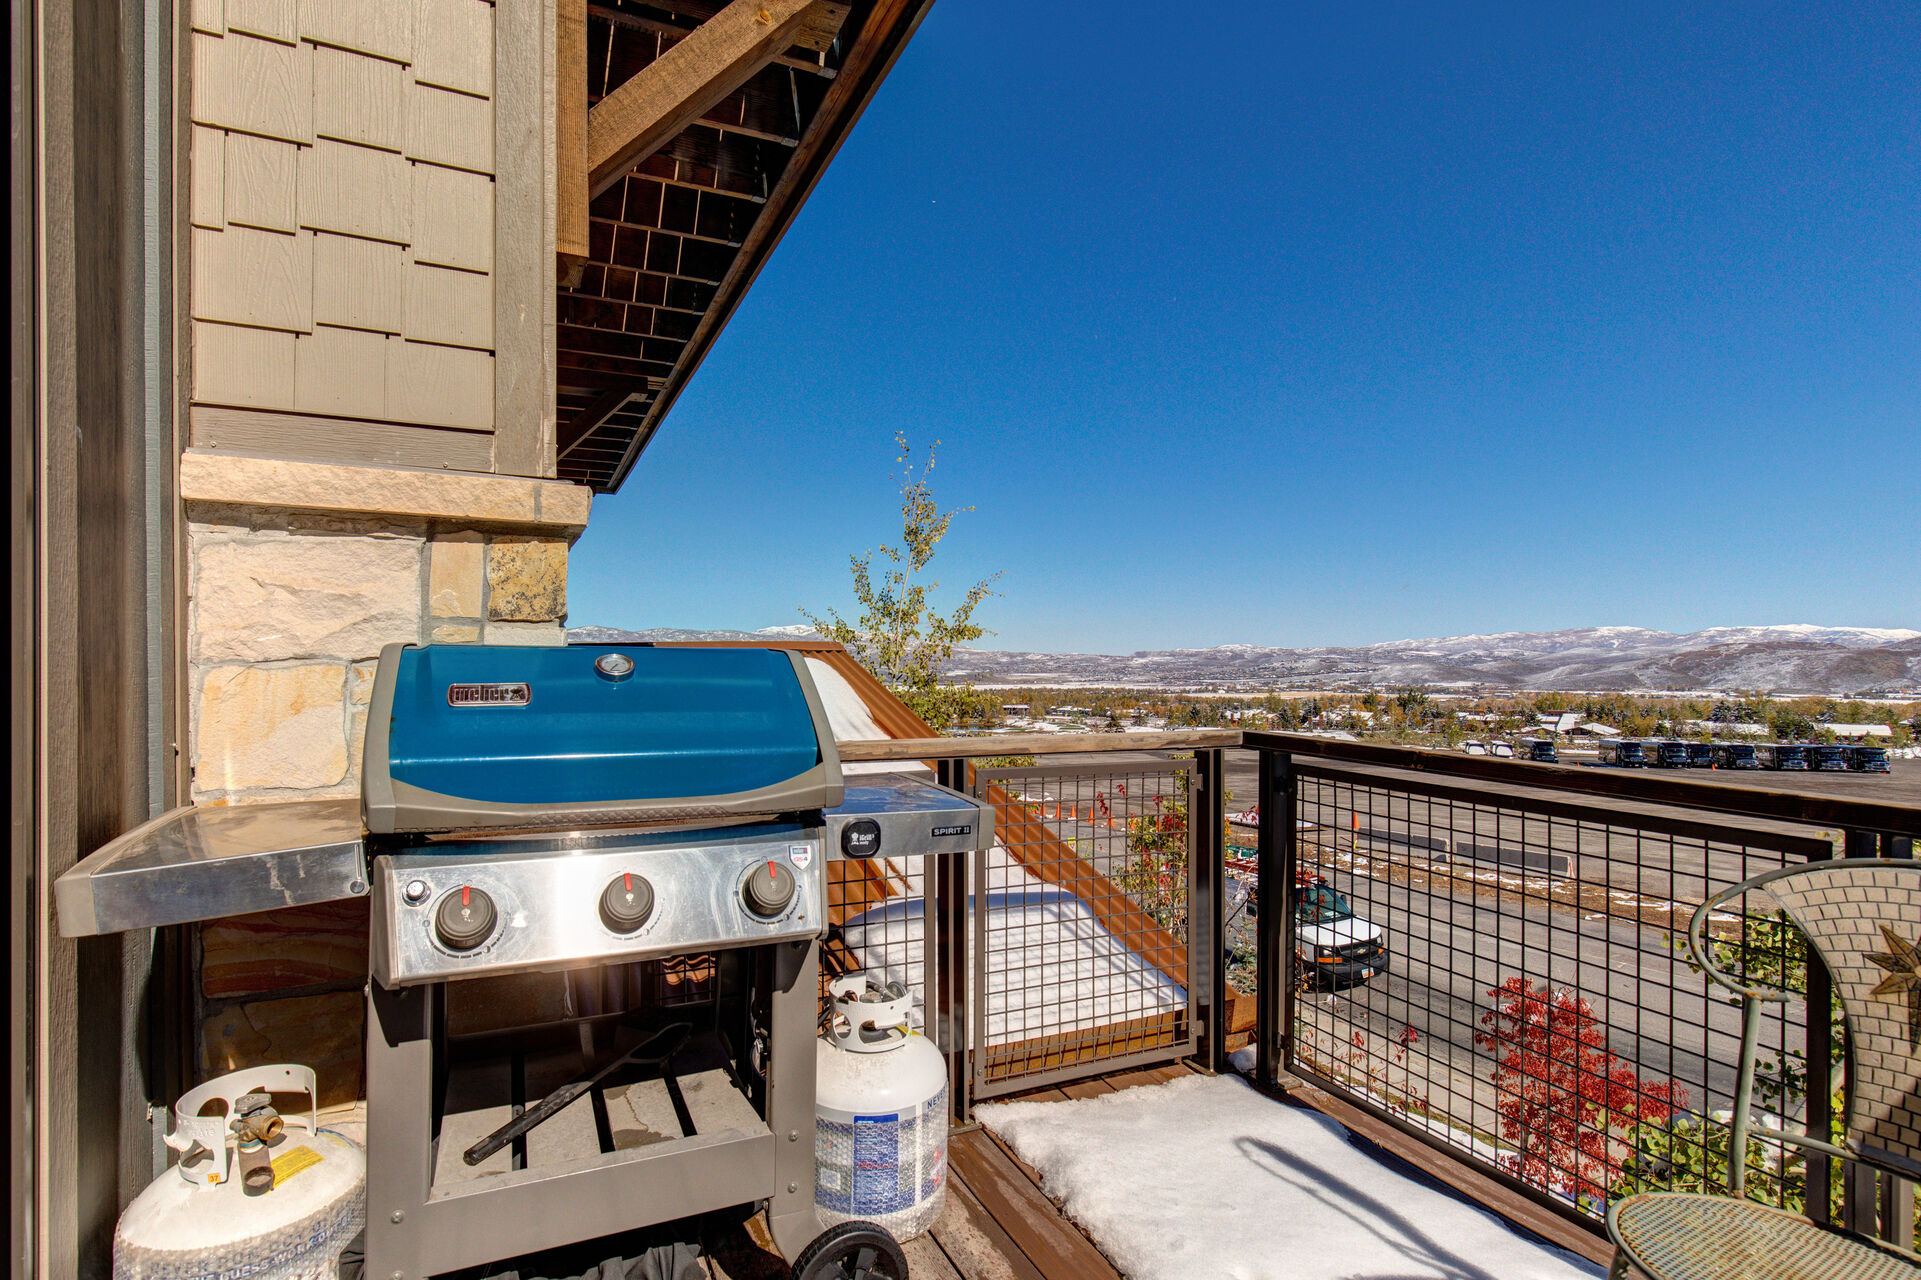 Private Patio with BBQ grill and gorgeous surrounding views